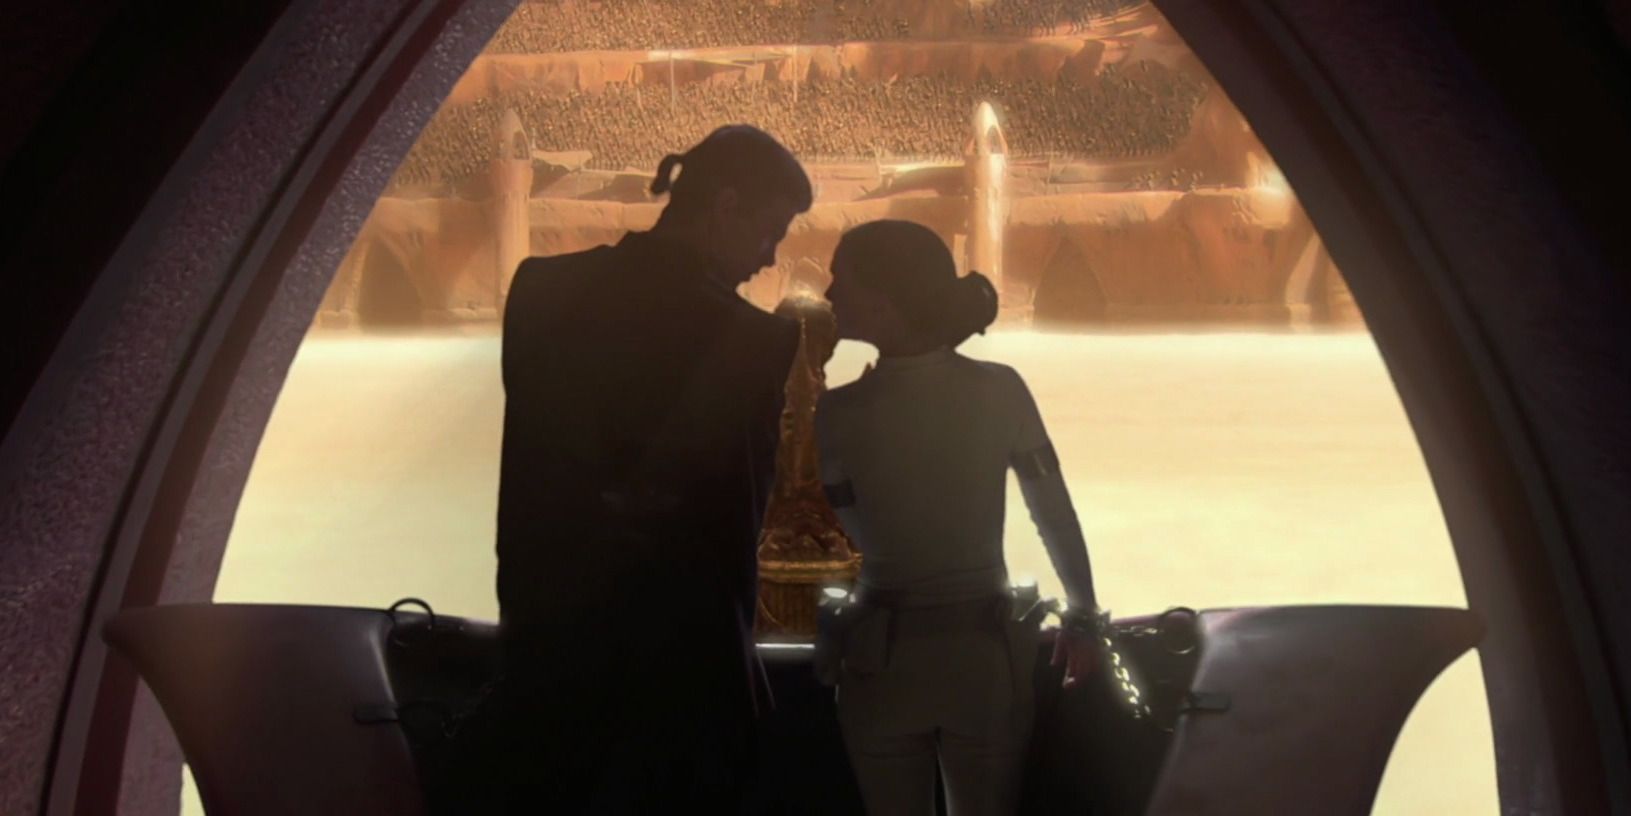 Anakin and Padme before the Trial on Geonosis in Attack of the Clones